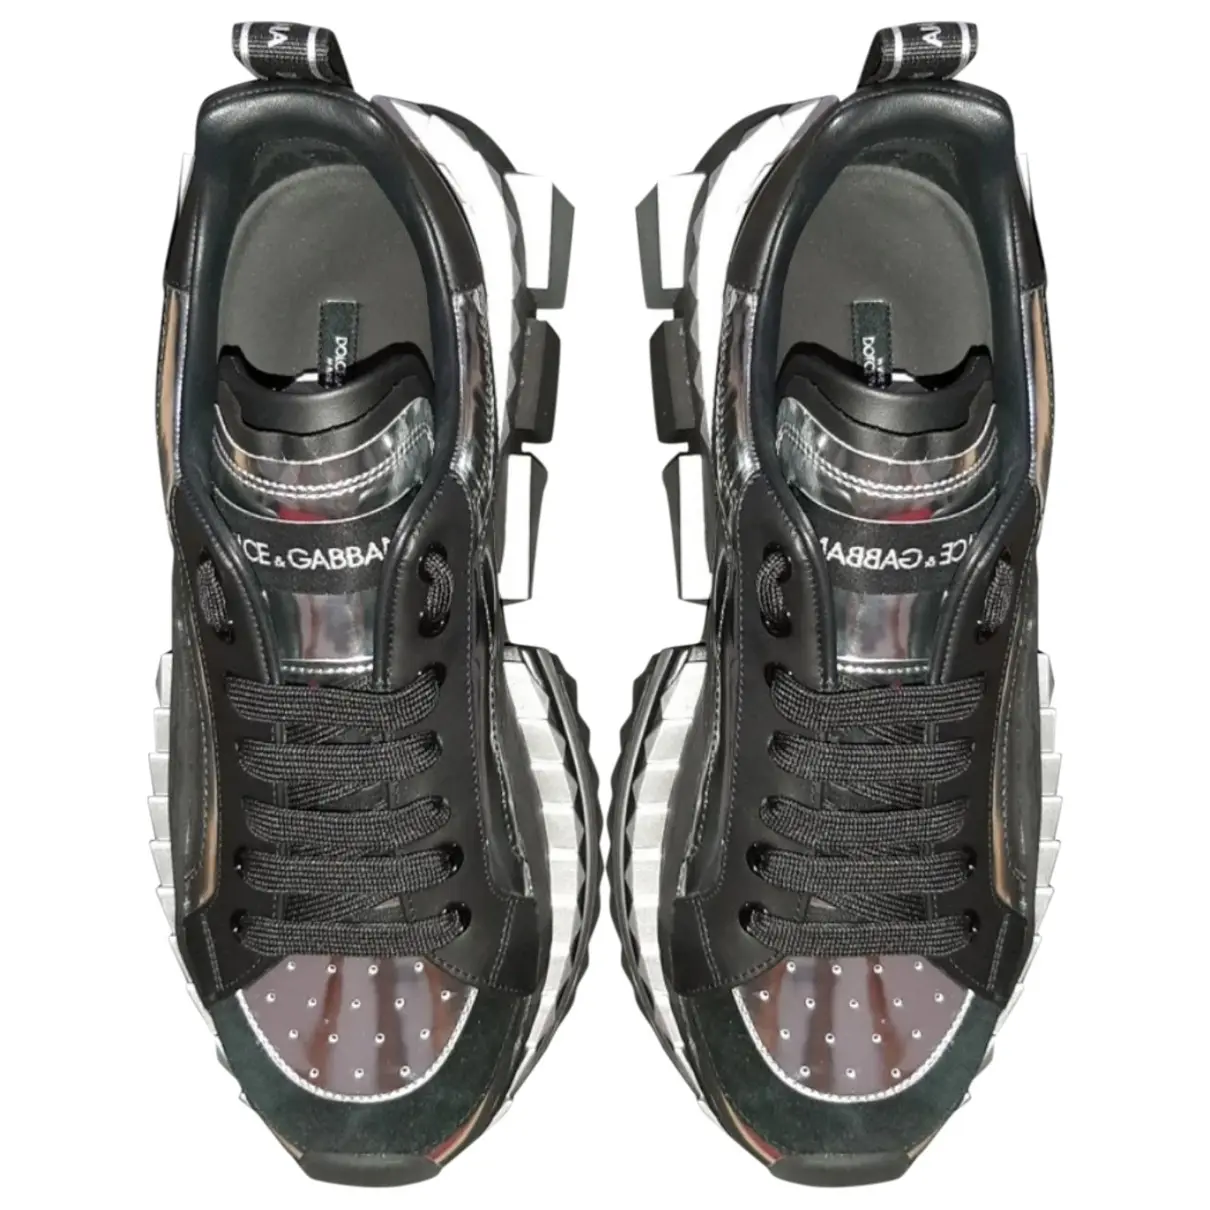 Super King leather high trainers Dolce & Gabbana